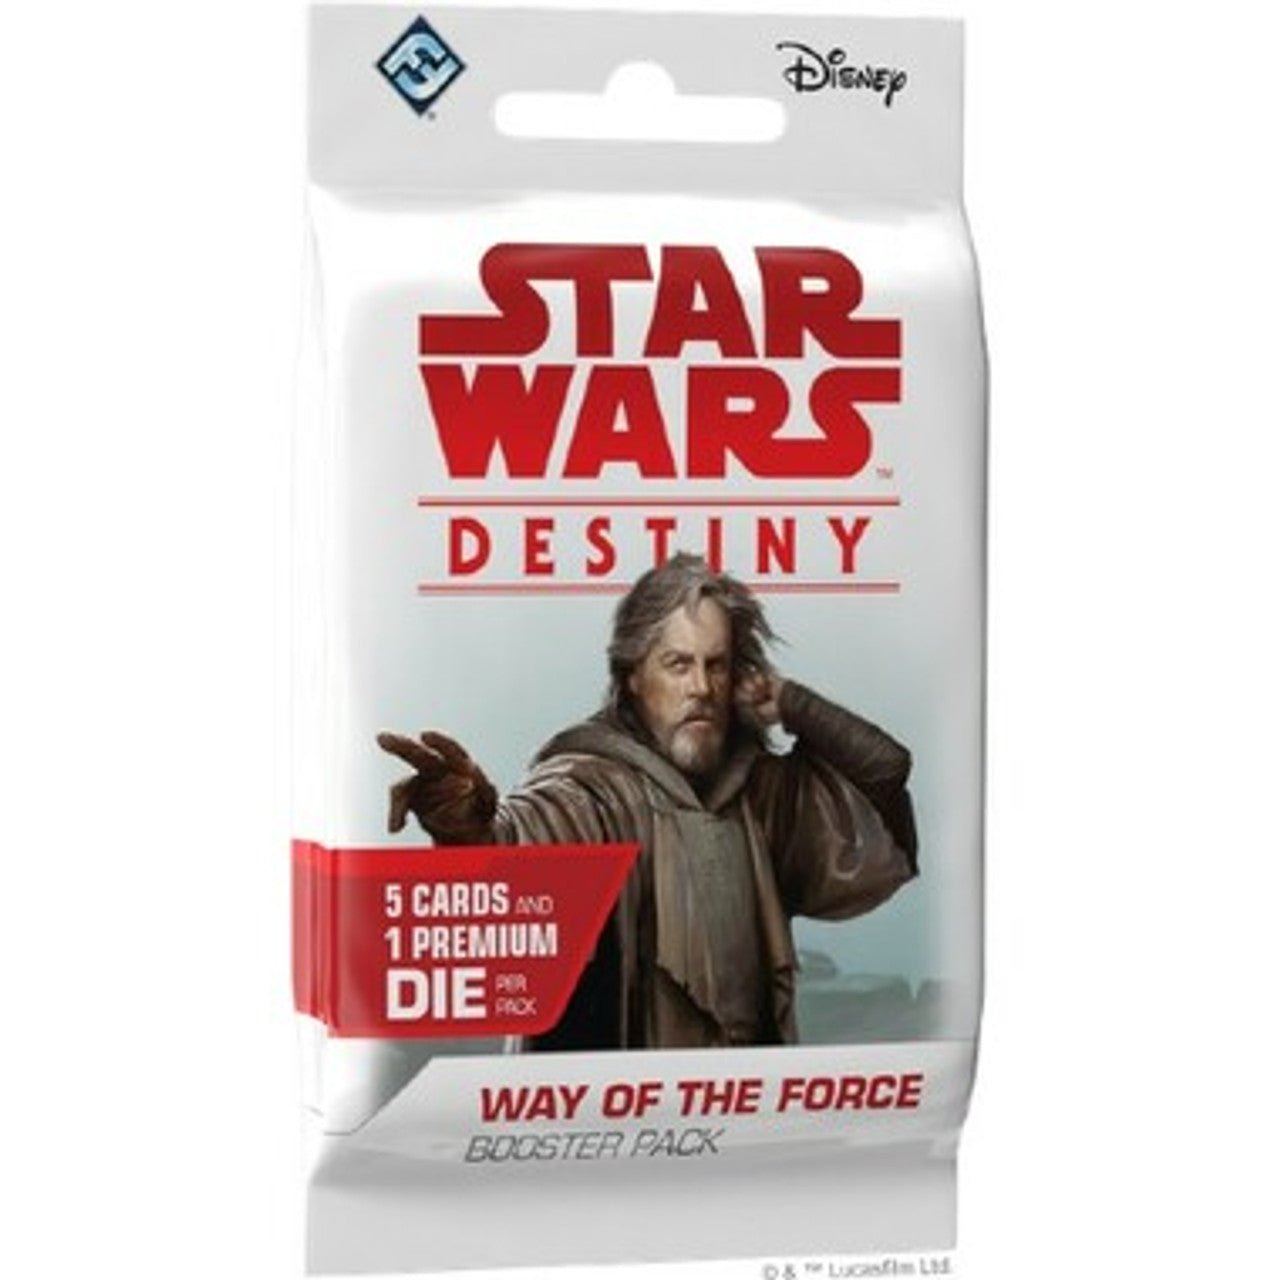 Star Wars Destiny: Way of the Force Booster Pack - Gamescape